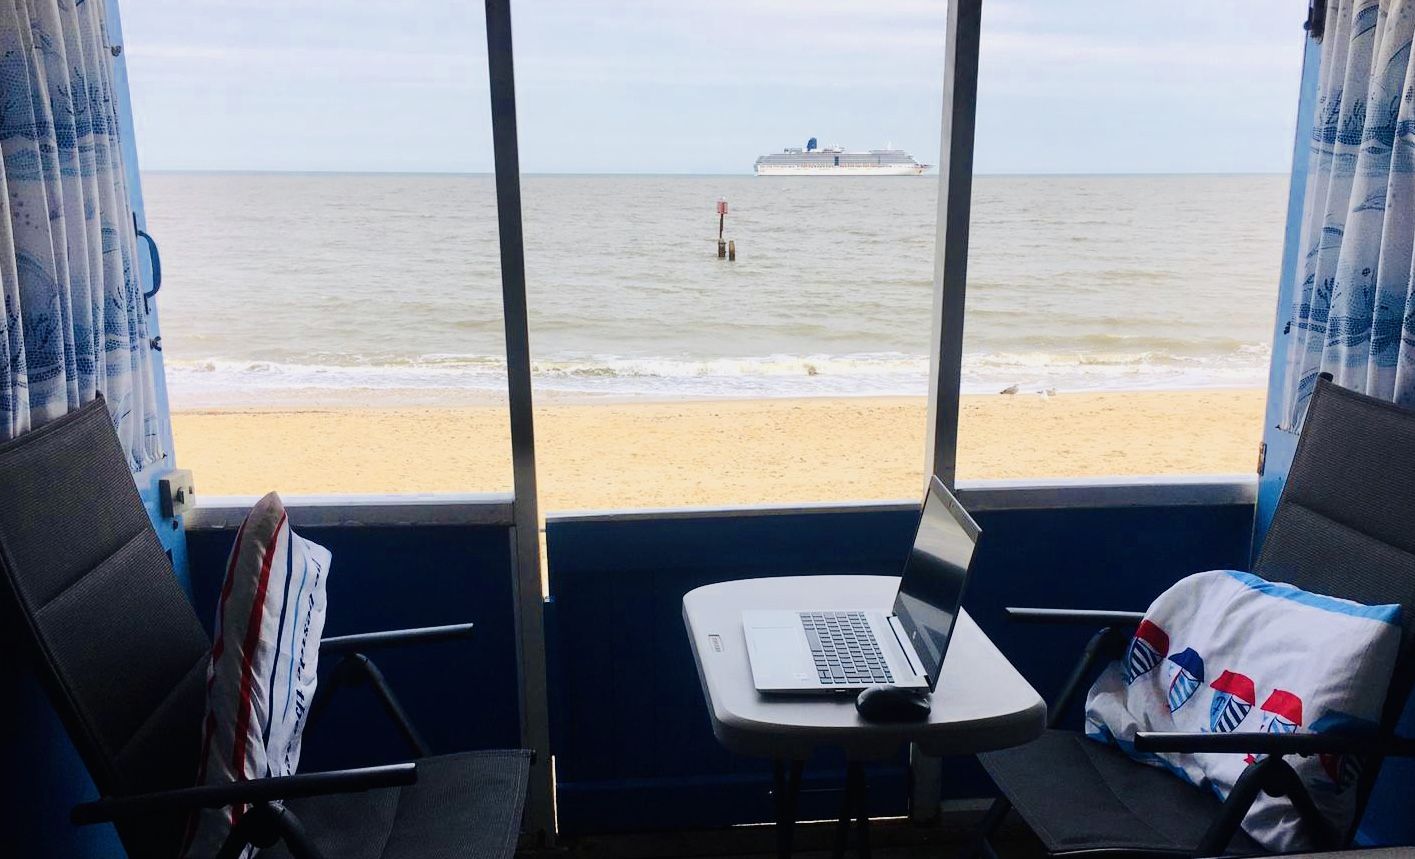 WFBH (Working from beach hut)